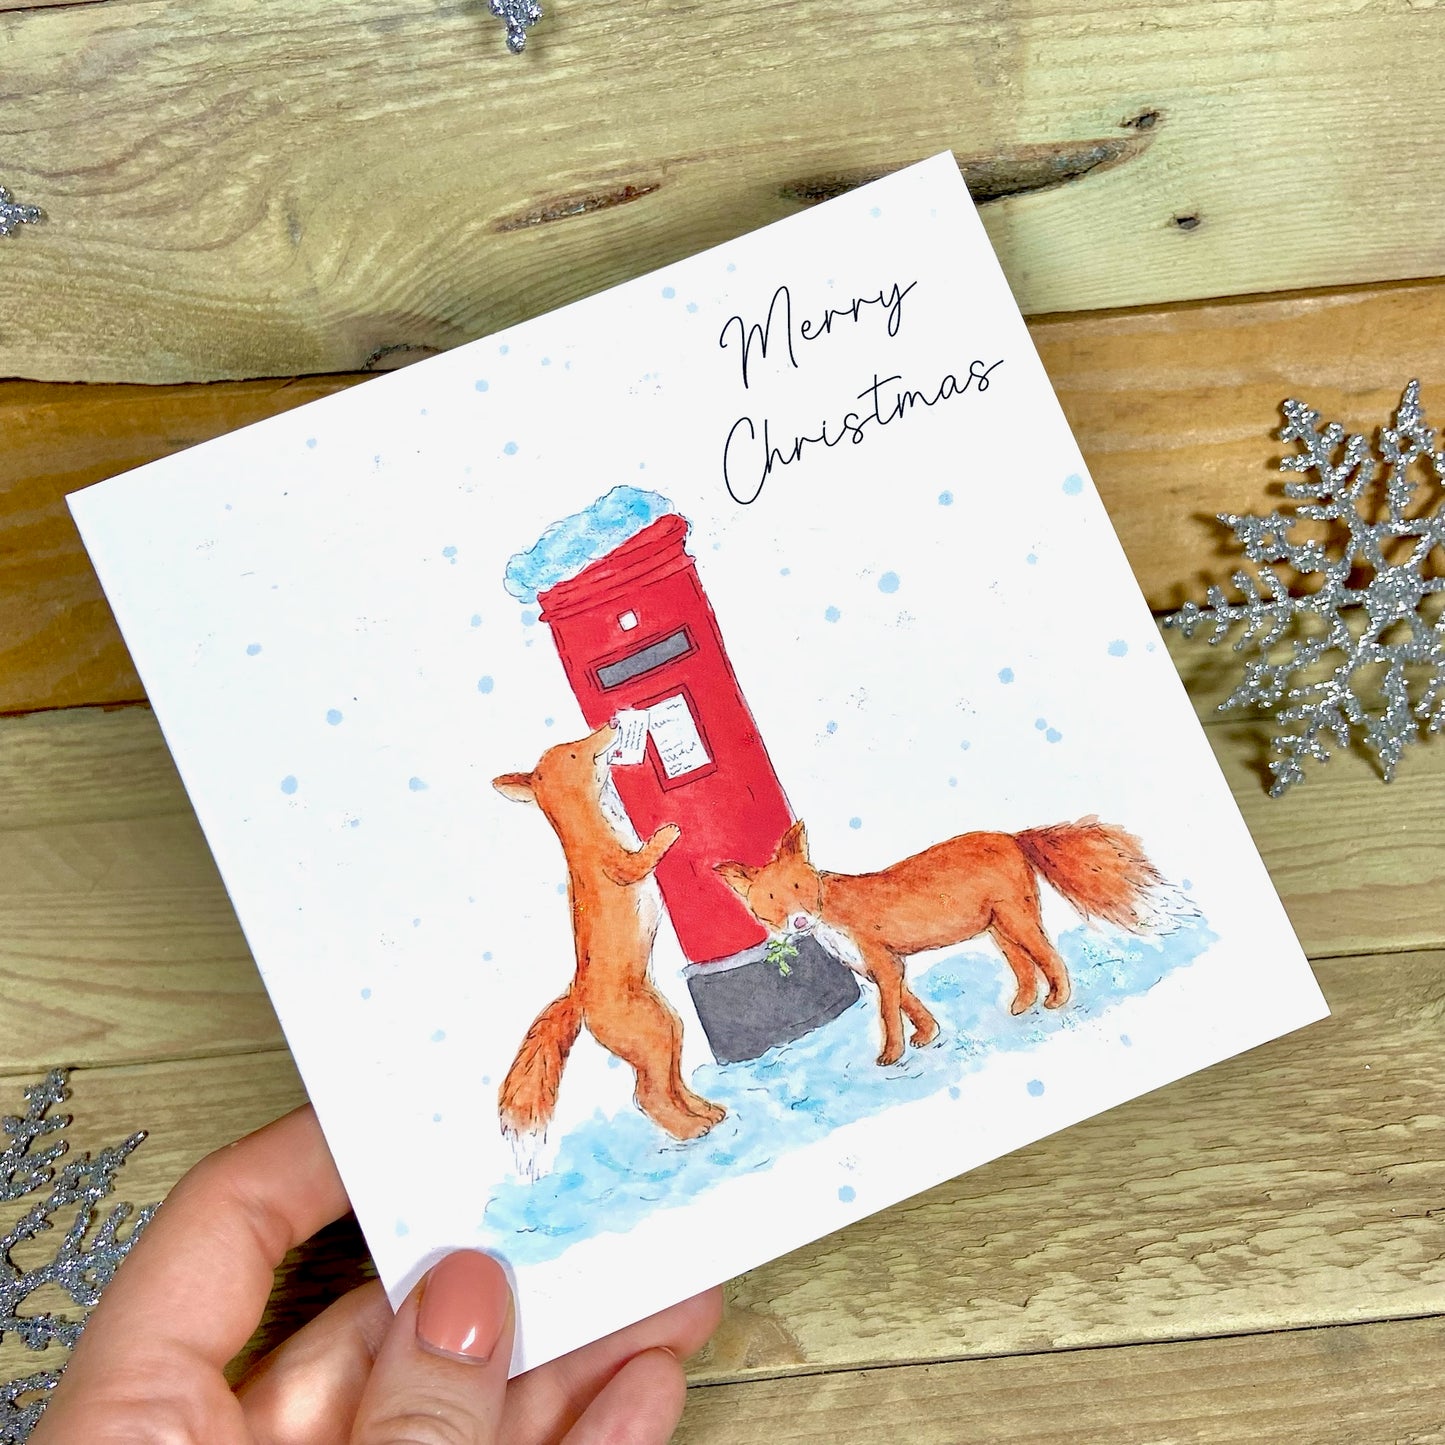 The Last Post Charity Christmas Card